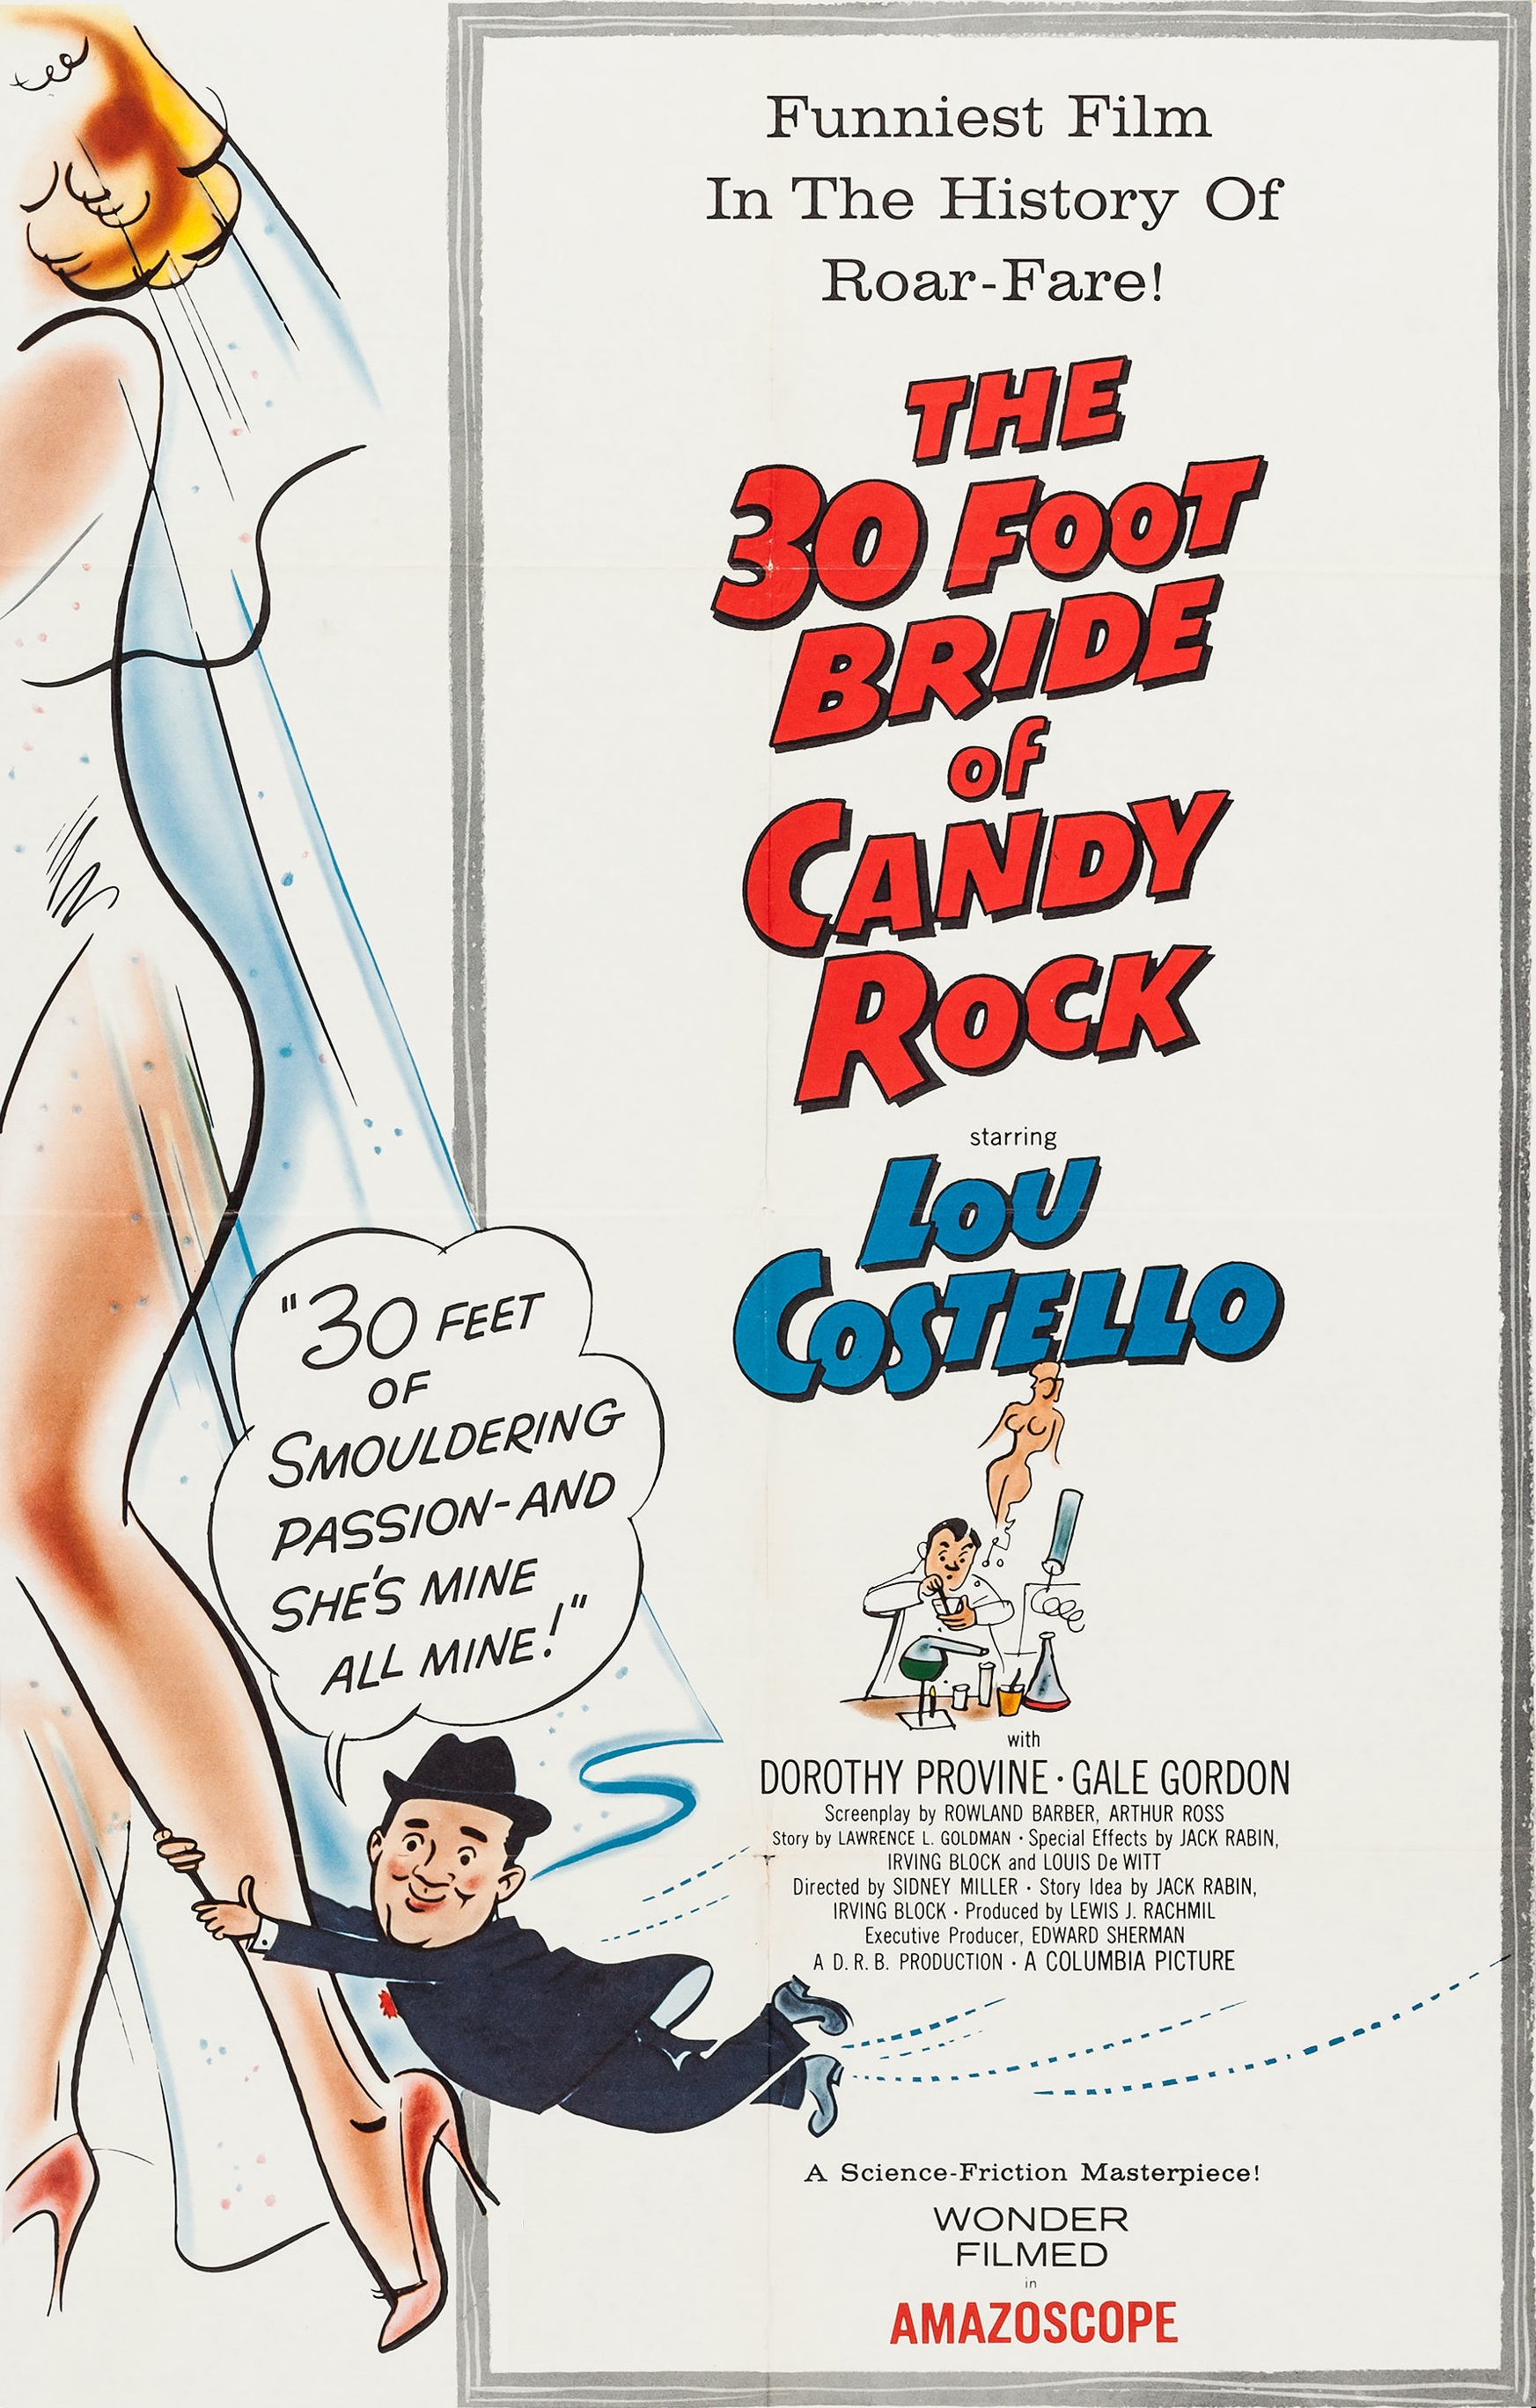 The 30 Foot Bride of Candy Rock (1959) starring Lou Costello on DVD on DVD